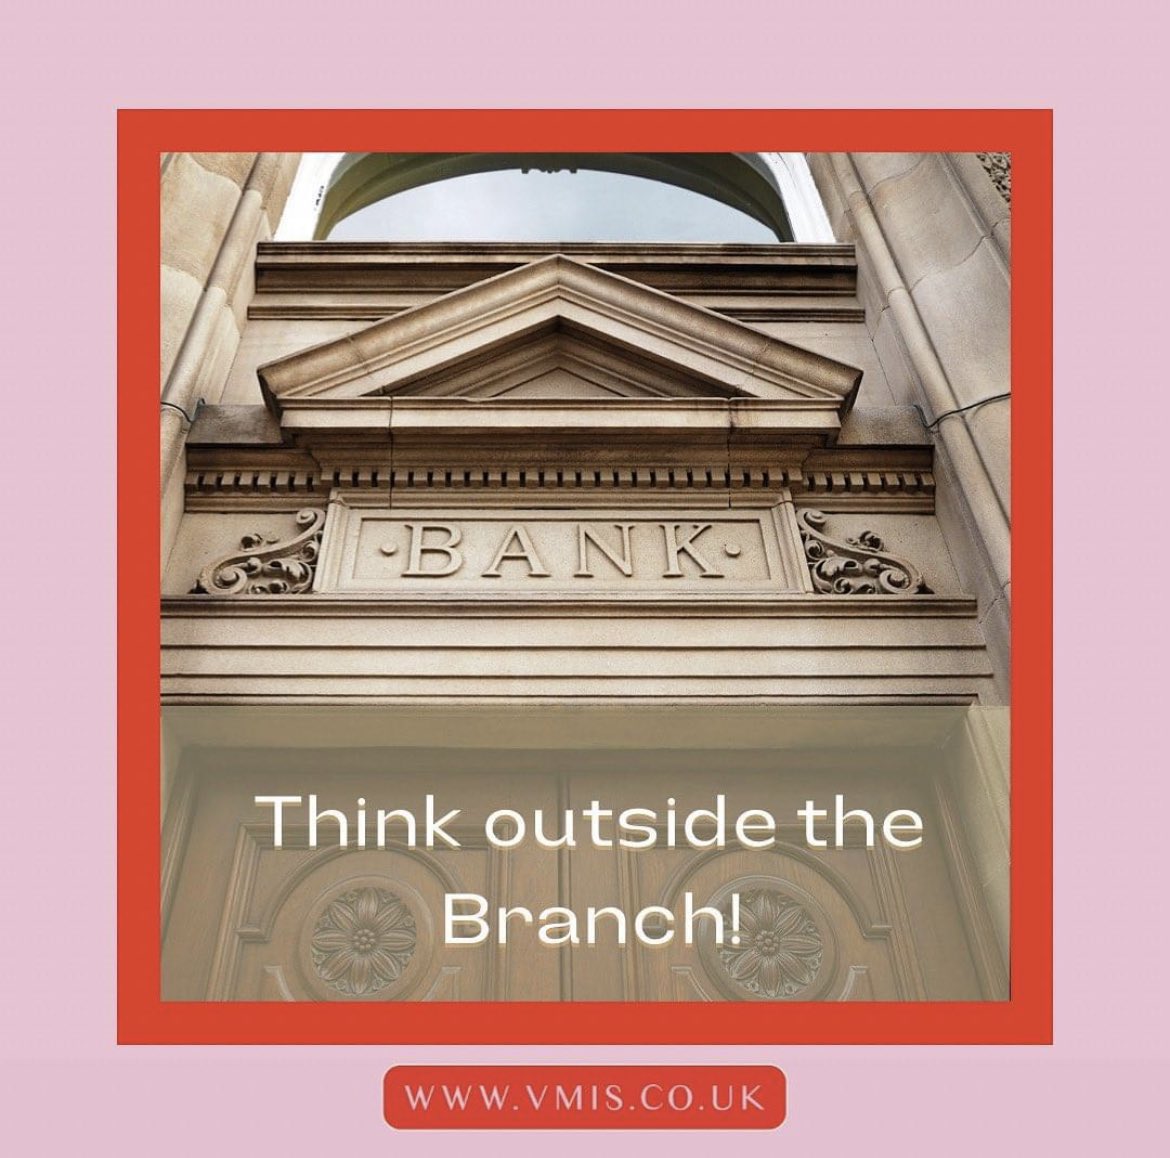 Think outside the branch! 
Your bank only recommends their own products.
Why limit yourself to one when you can find out all your options with a small bespoke firm looking out for you.
Get in touch with us.
#banks #financialadvisors #financialpolicies #protectyourworld